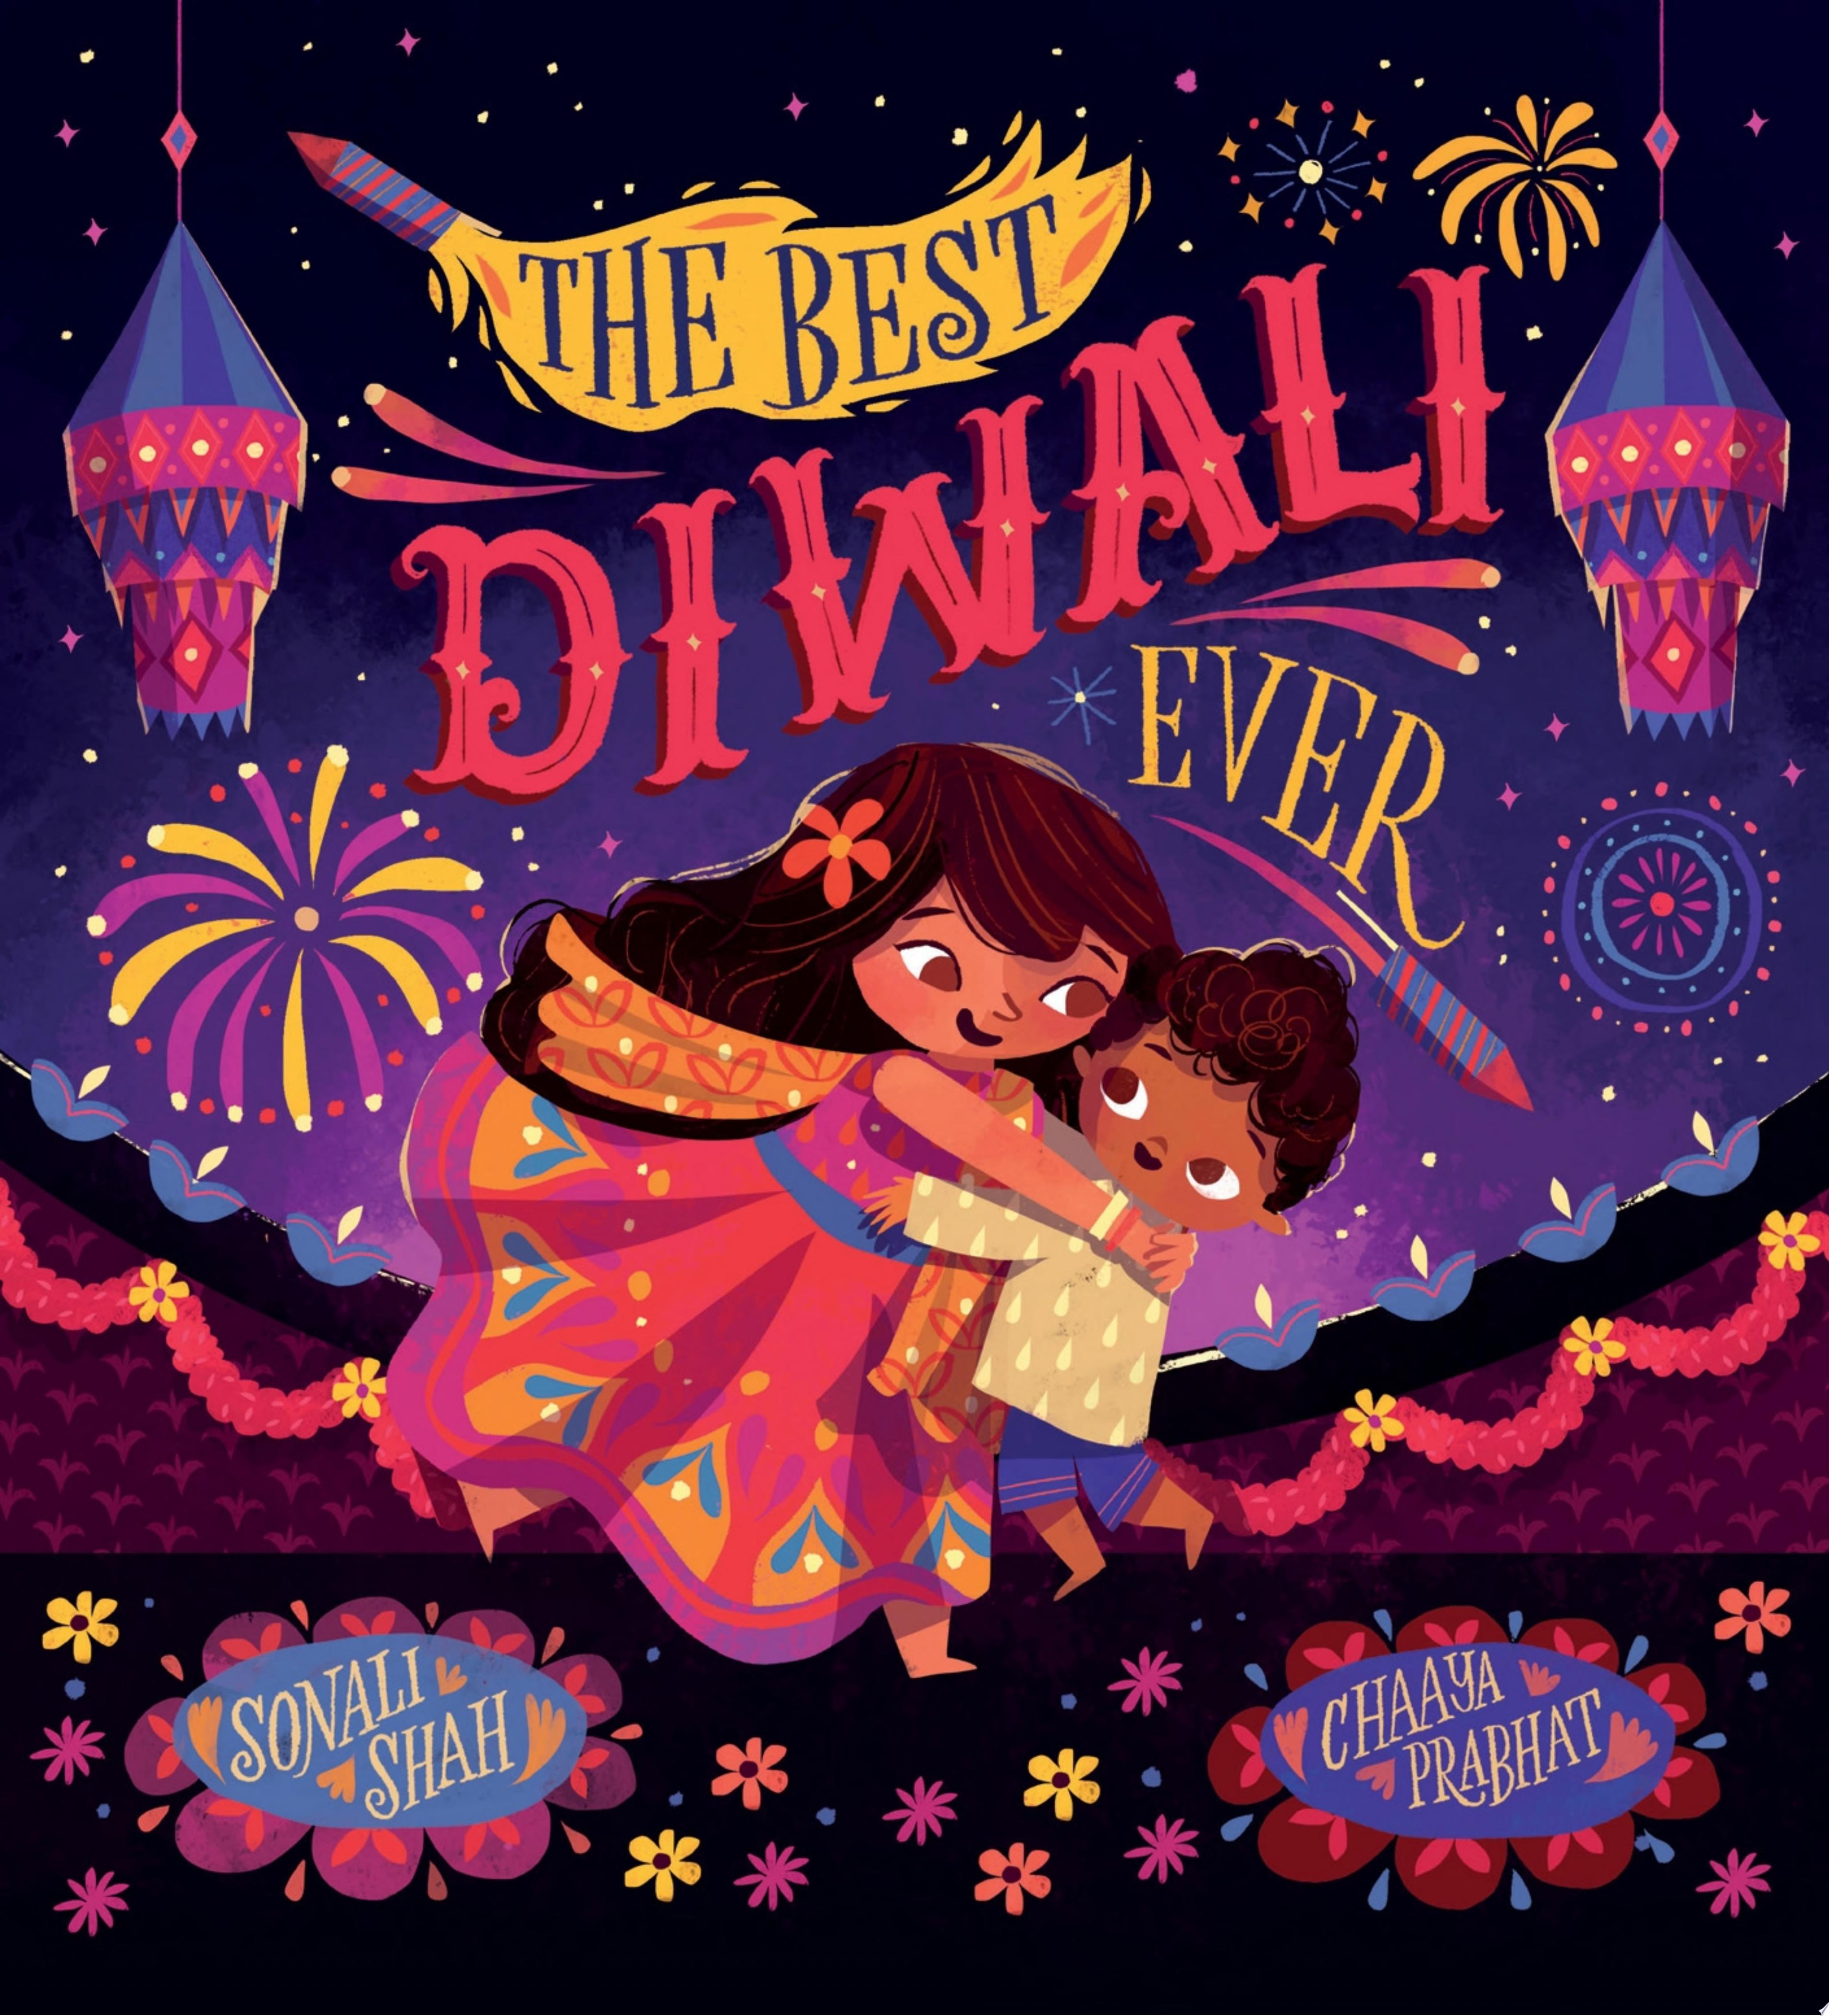 Image for "The Best Diwali Ever"